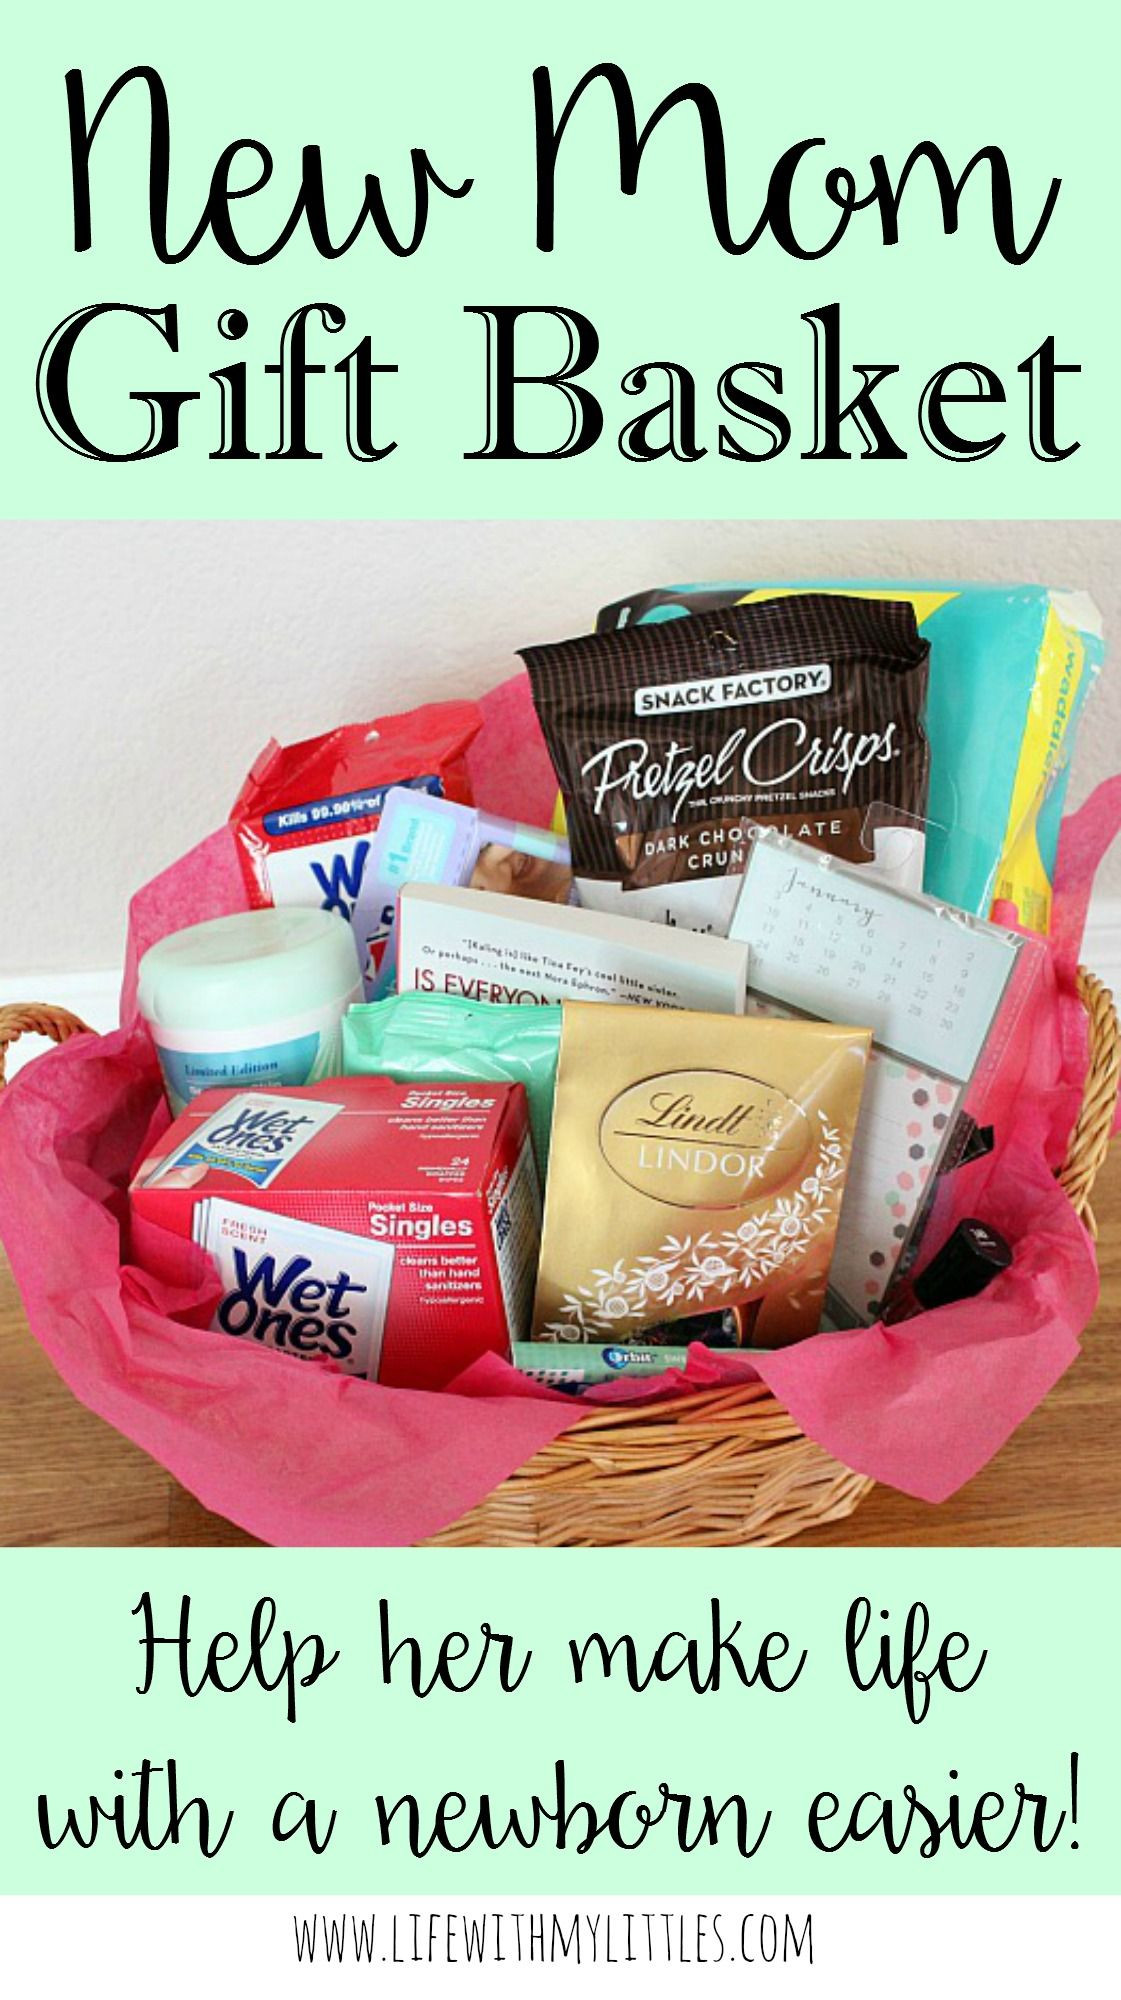 Birth Mother Gift Ideas
 New Mom Gift Basket